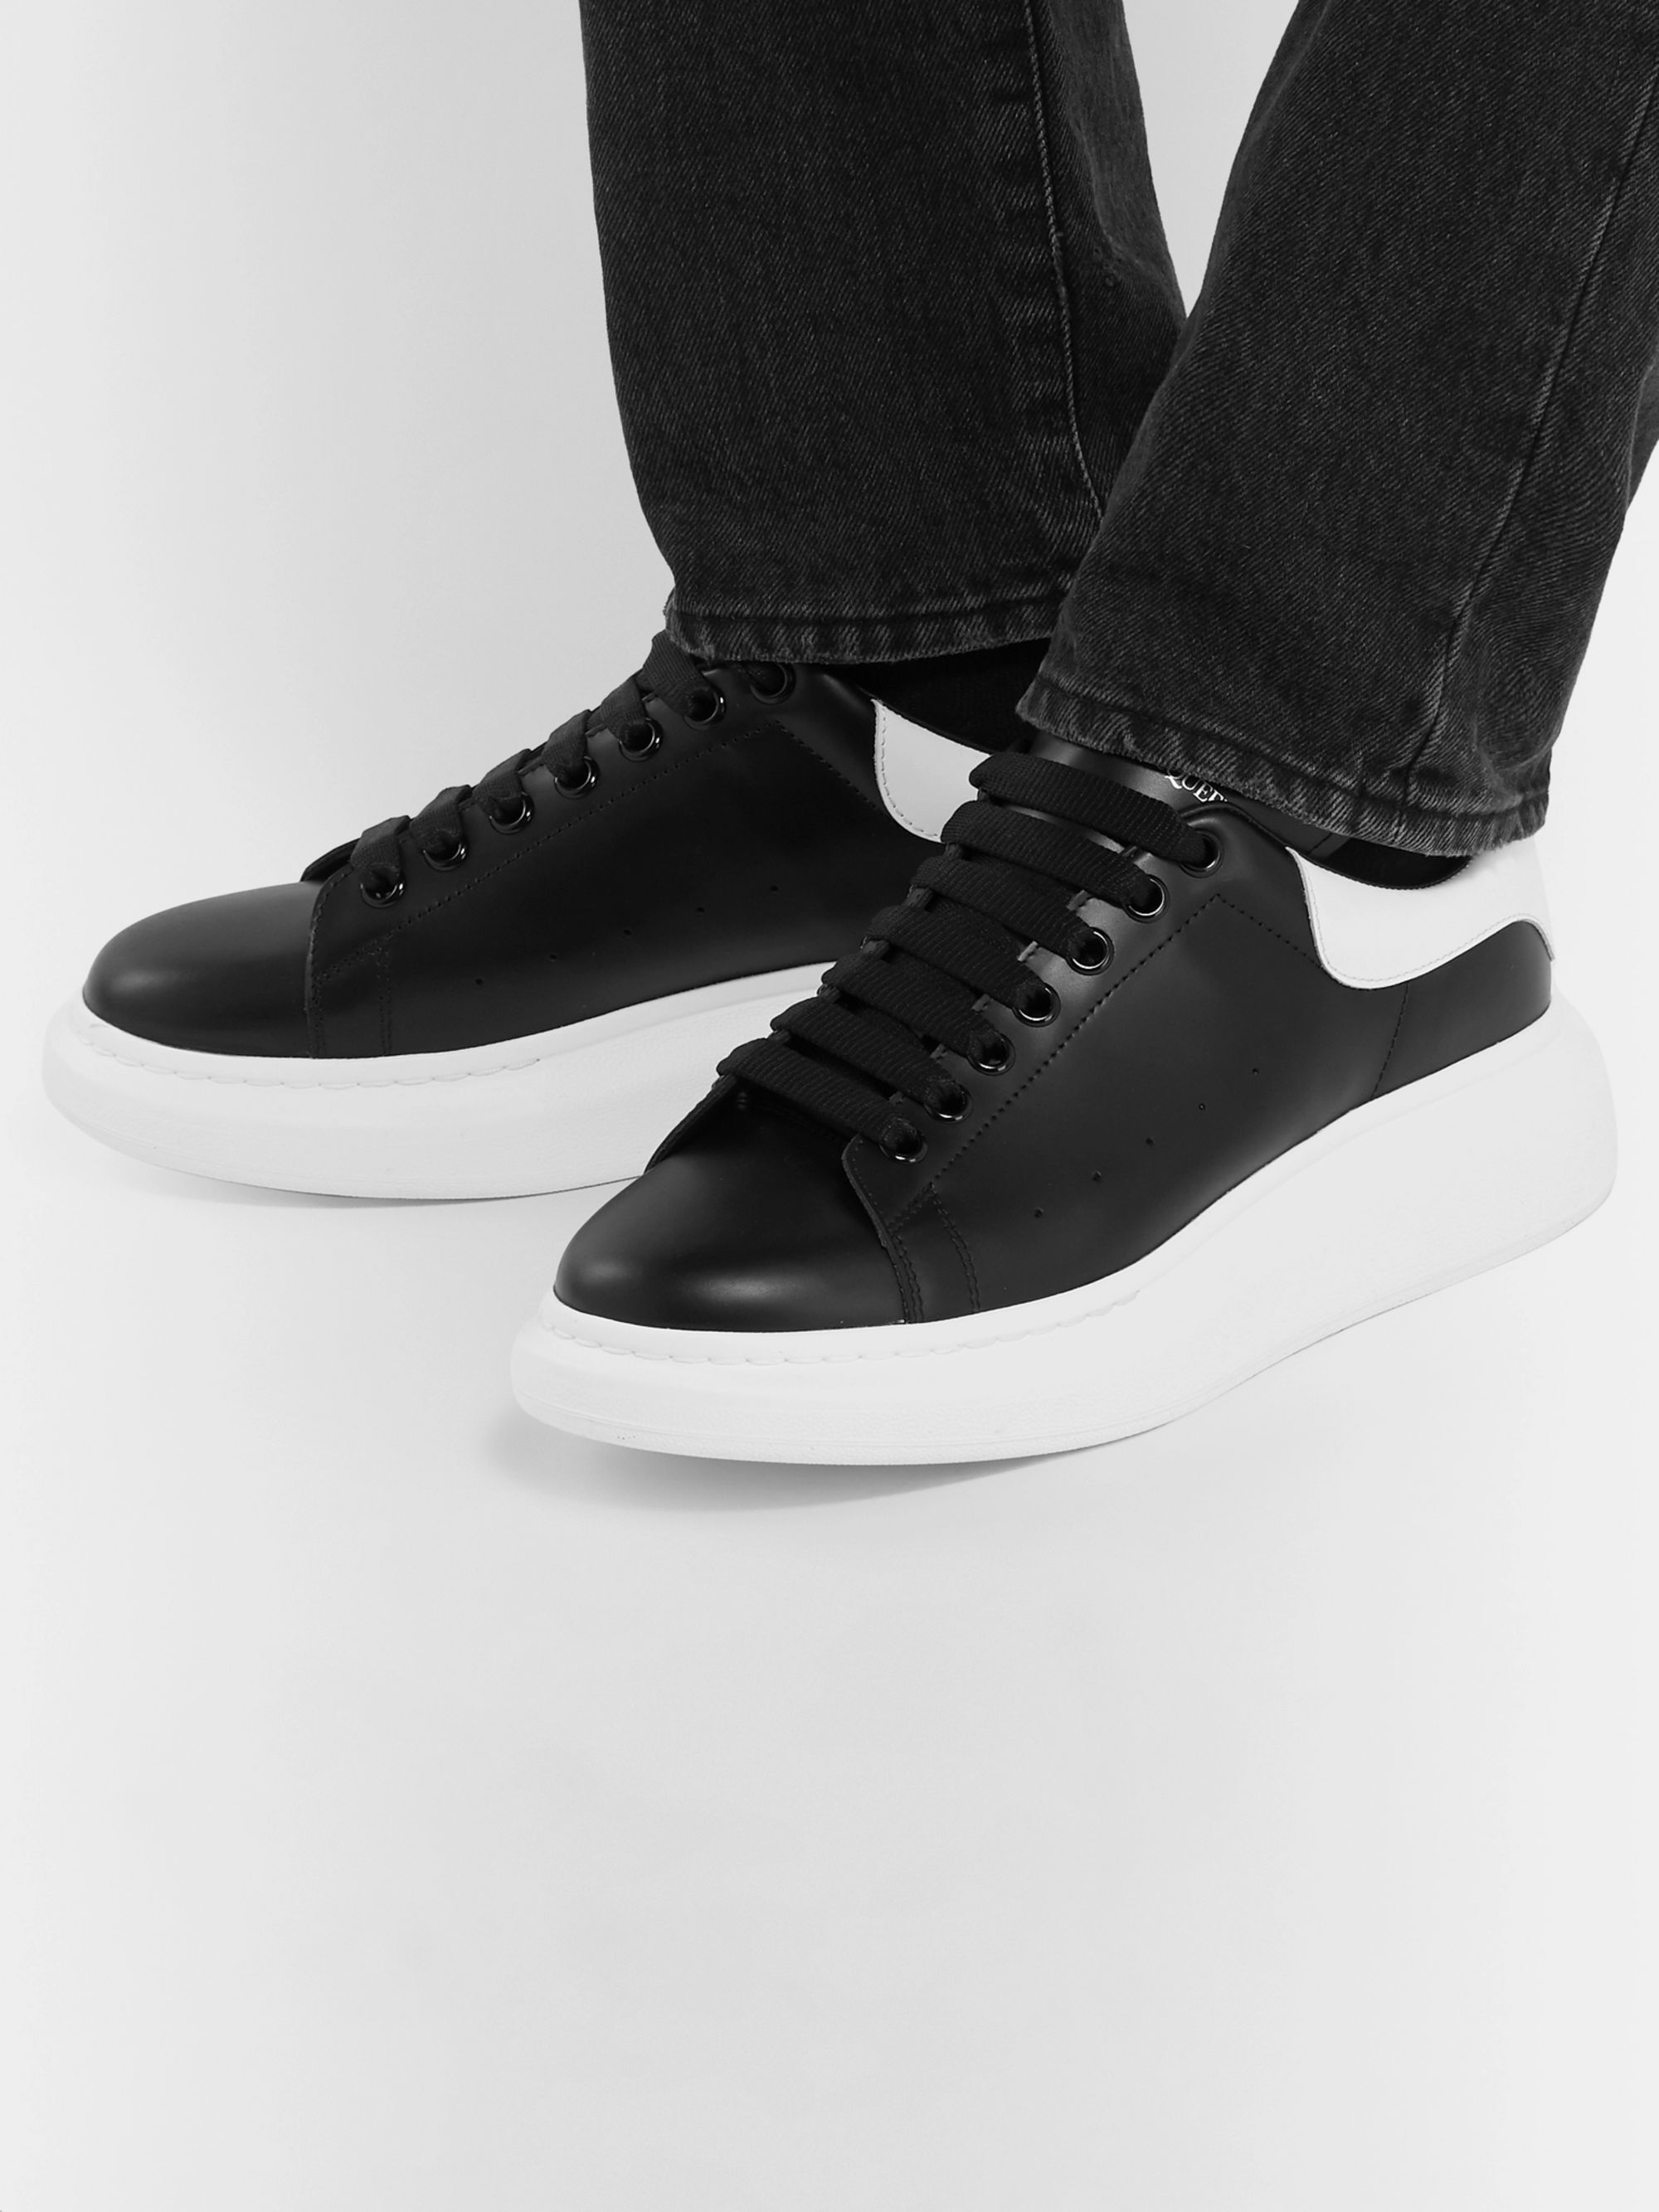 black leather sneakers white sole